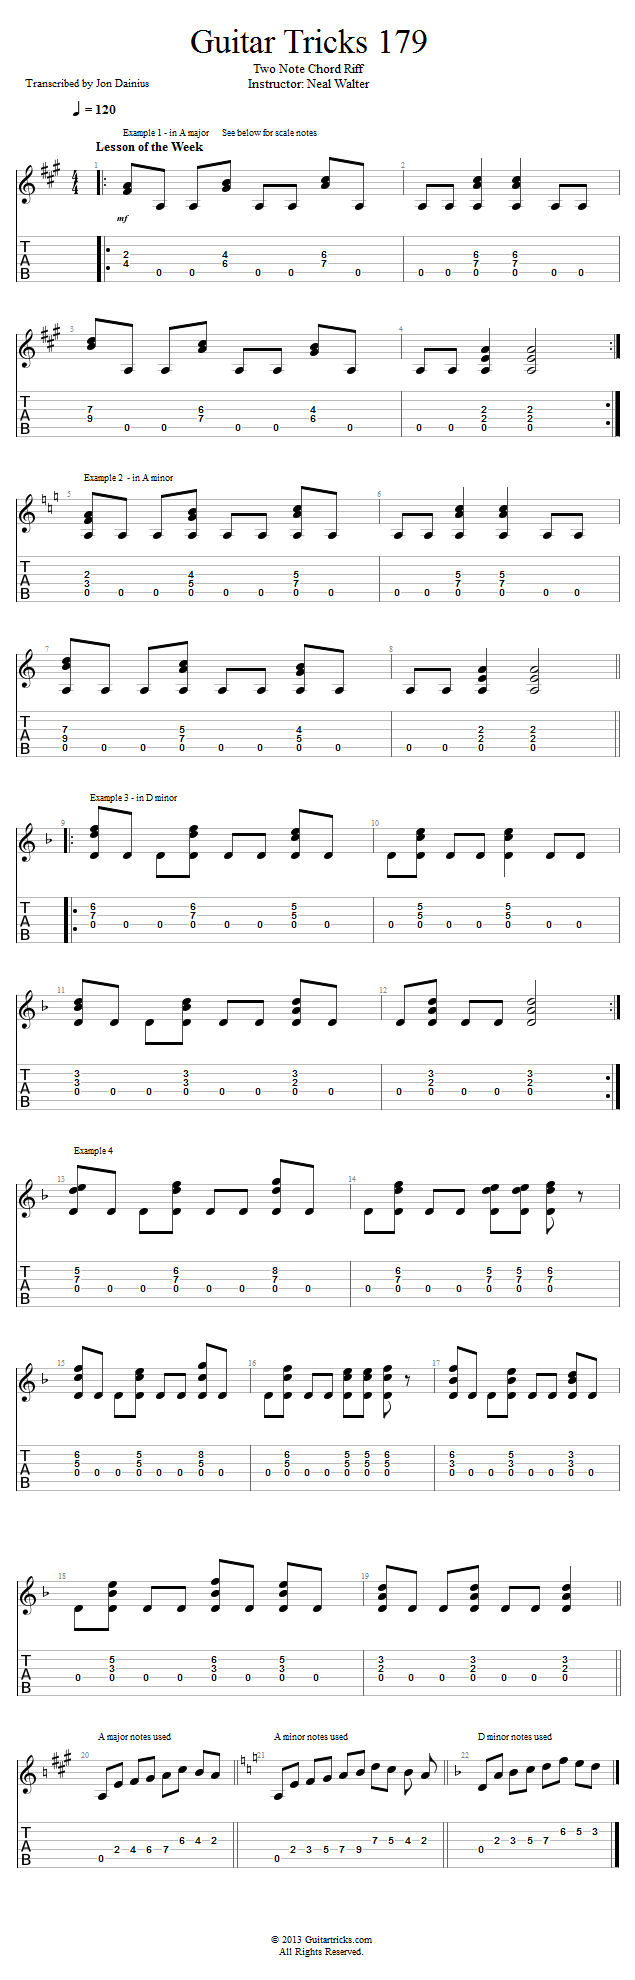 Guitar Tricks 179: Two Note Chord Riff song notation